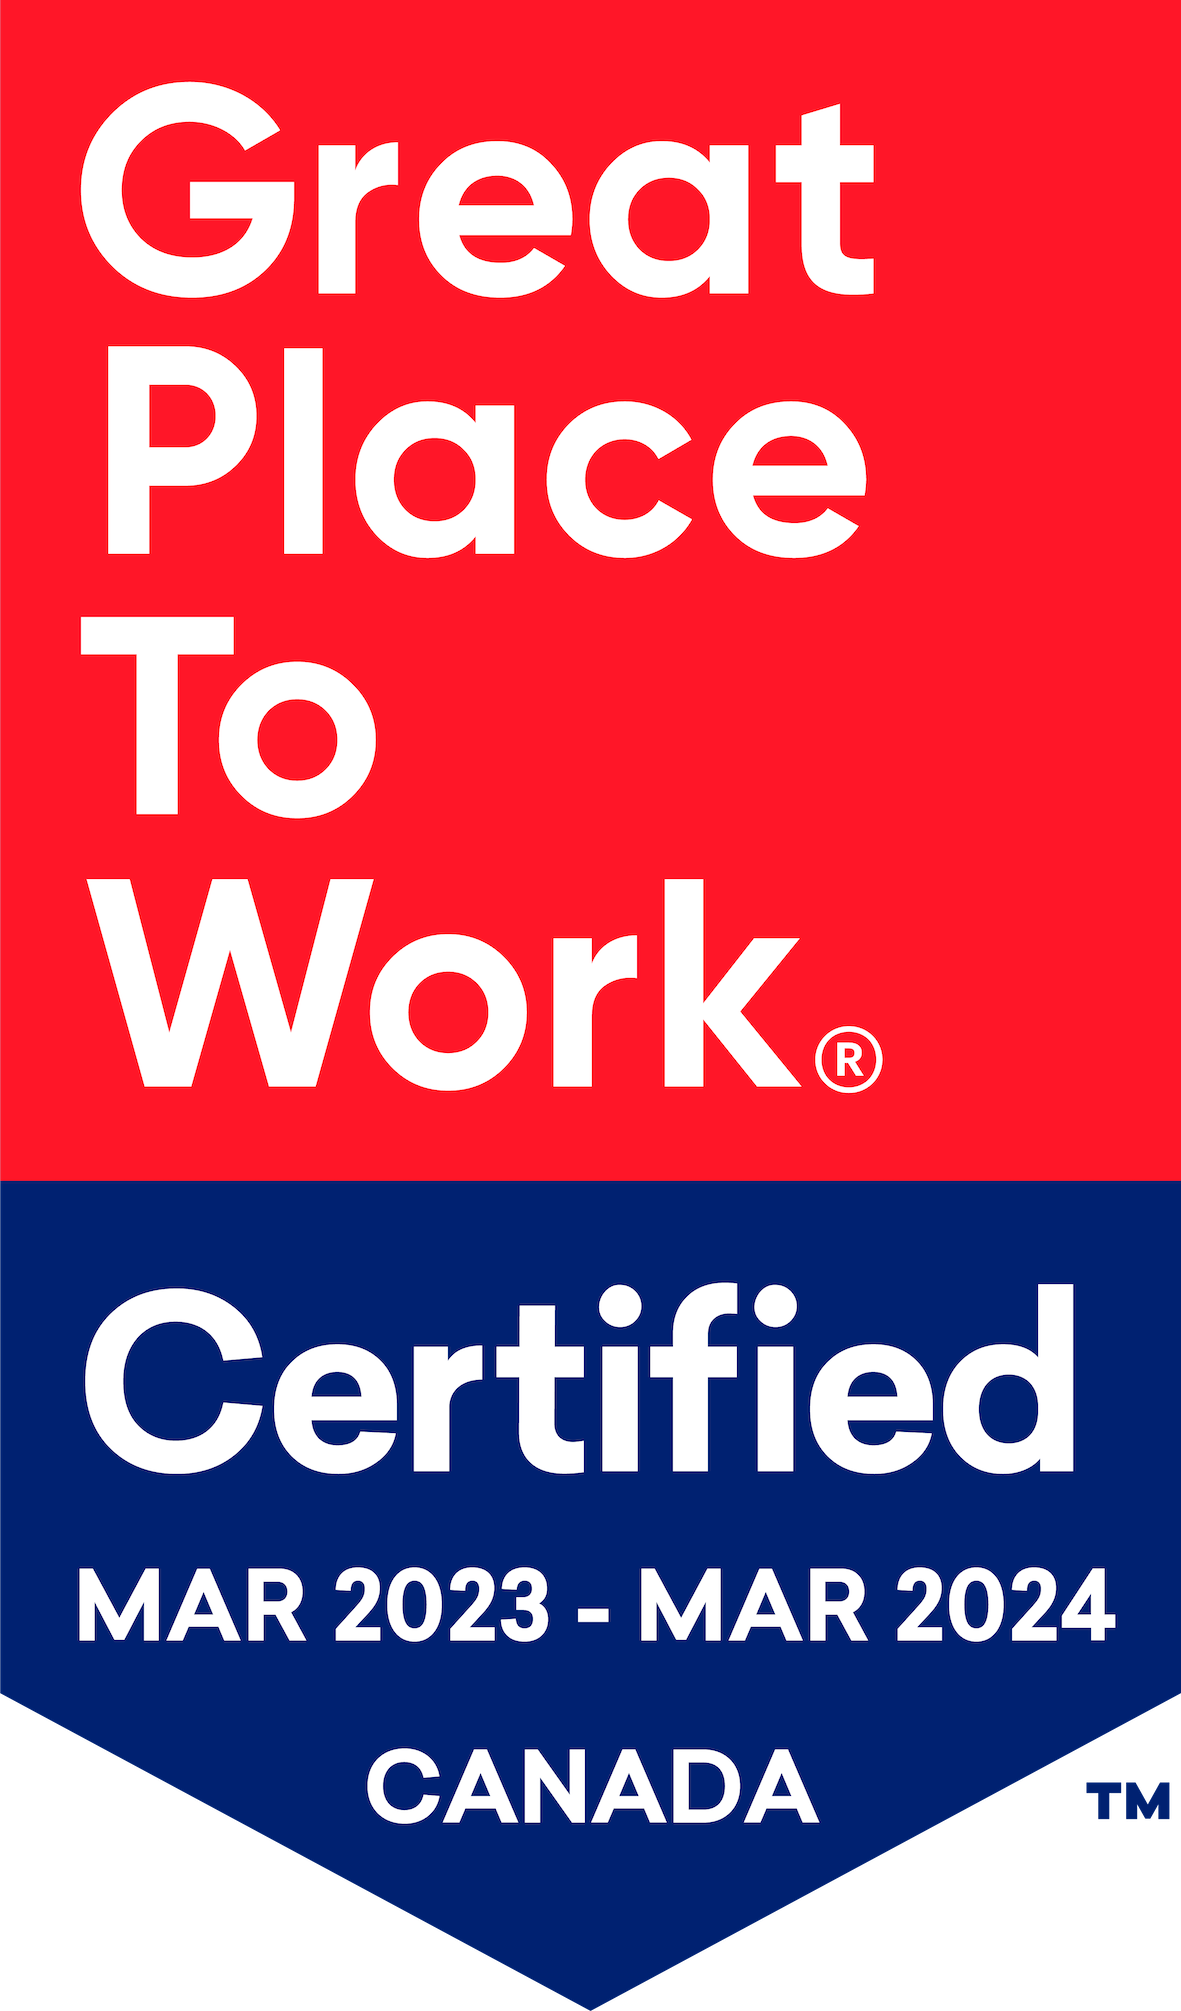 Great Place To Work.  Certified APR 2021- MAR 2022 Canada.